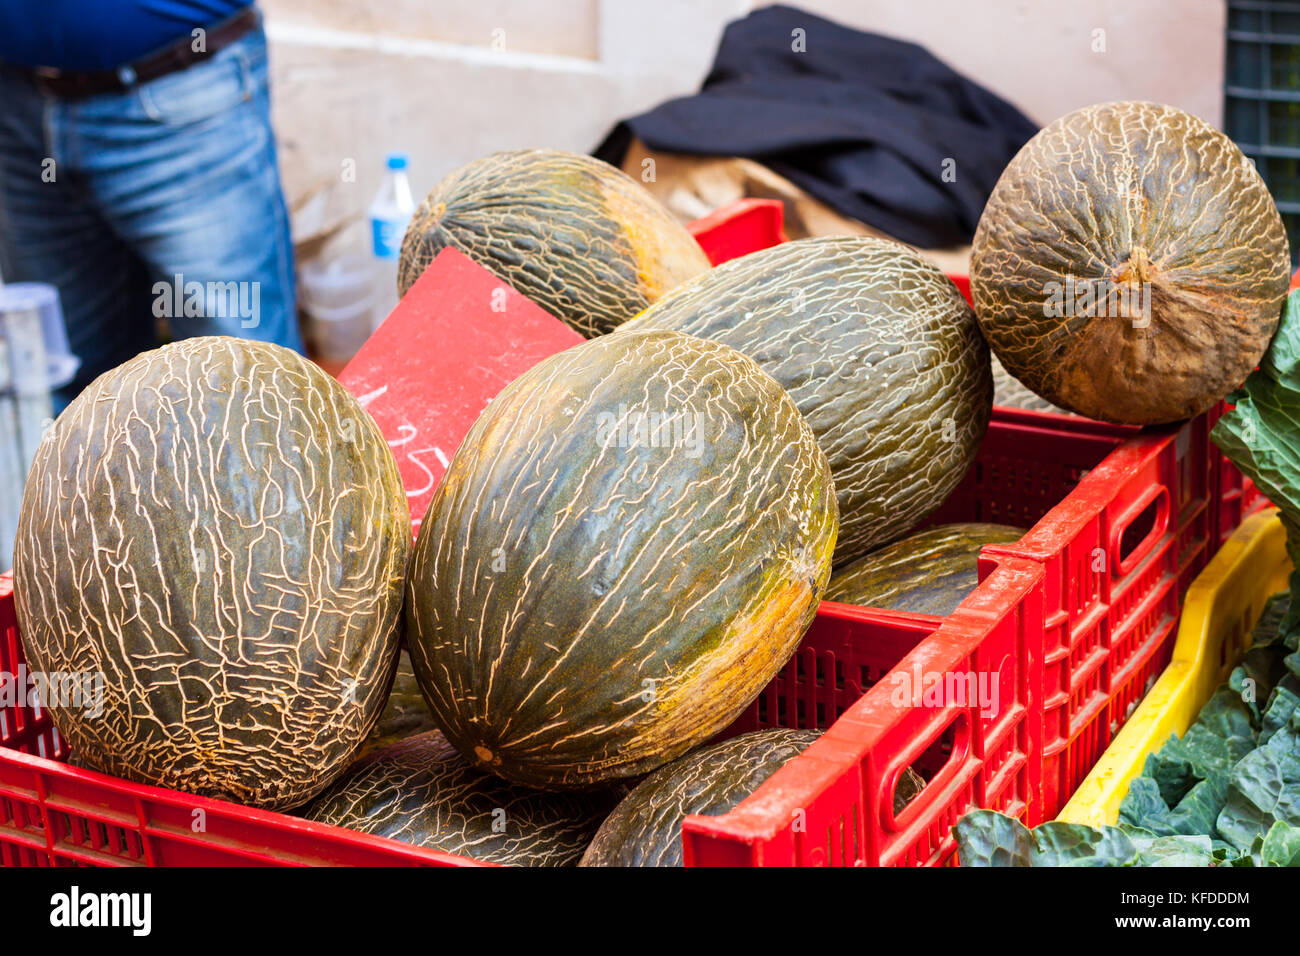 Green oval Santa Claus melons also known as 'piel de sapo' ('toad skin') melons for sale at Sineu market, Majorca, Spain Stock Photo